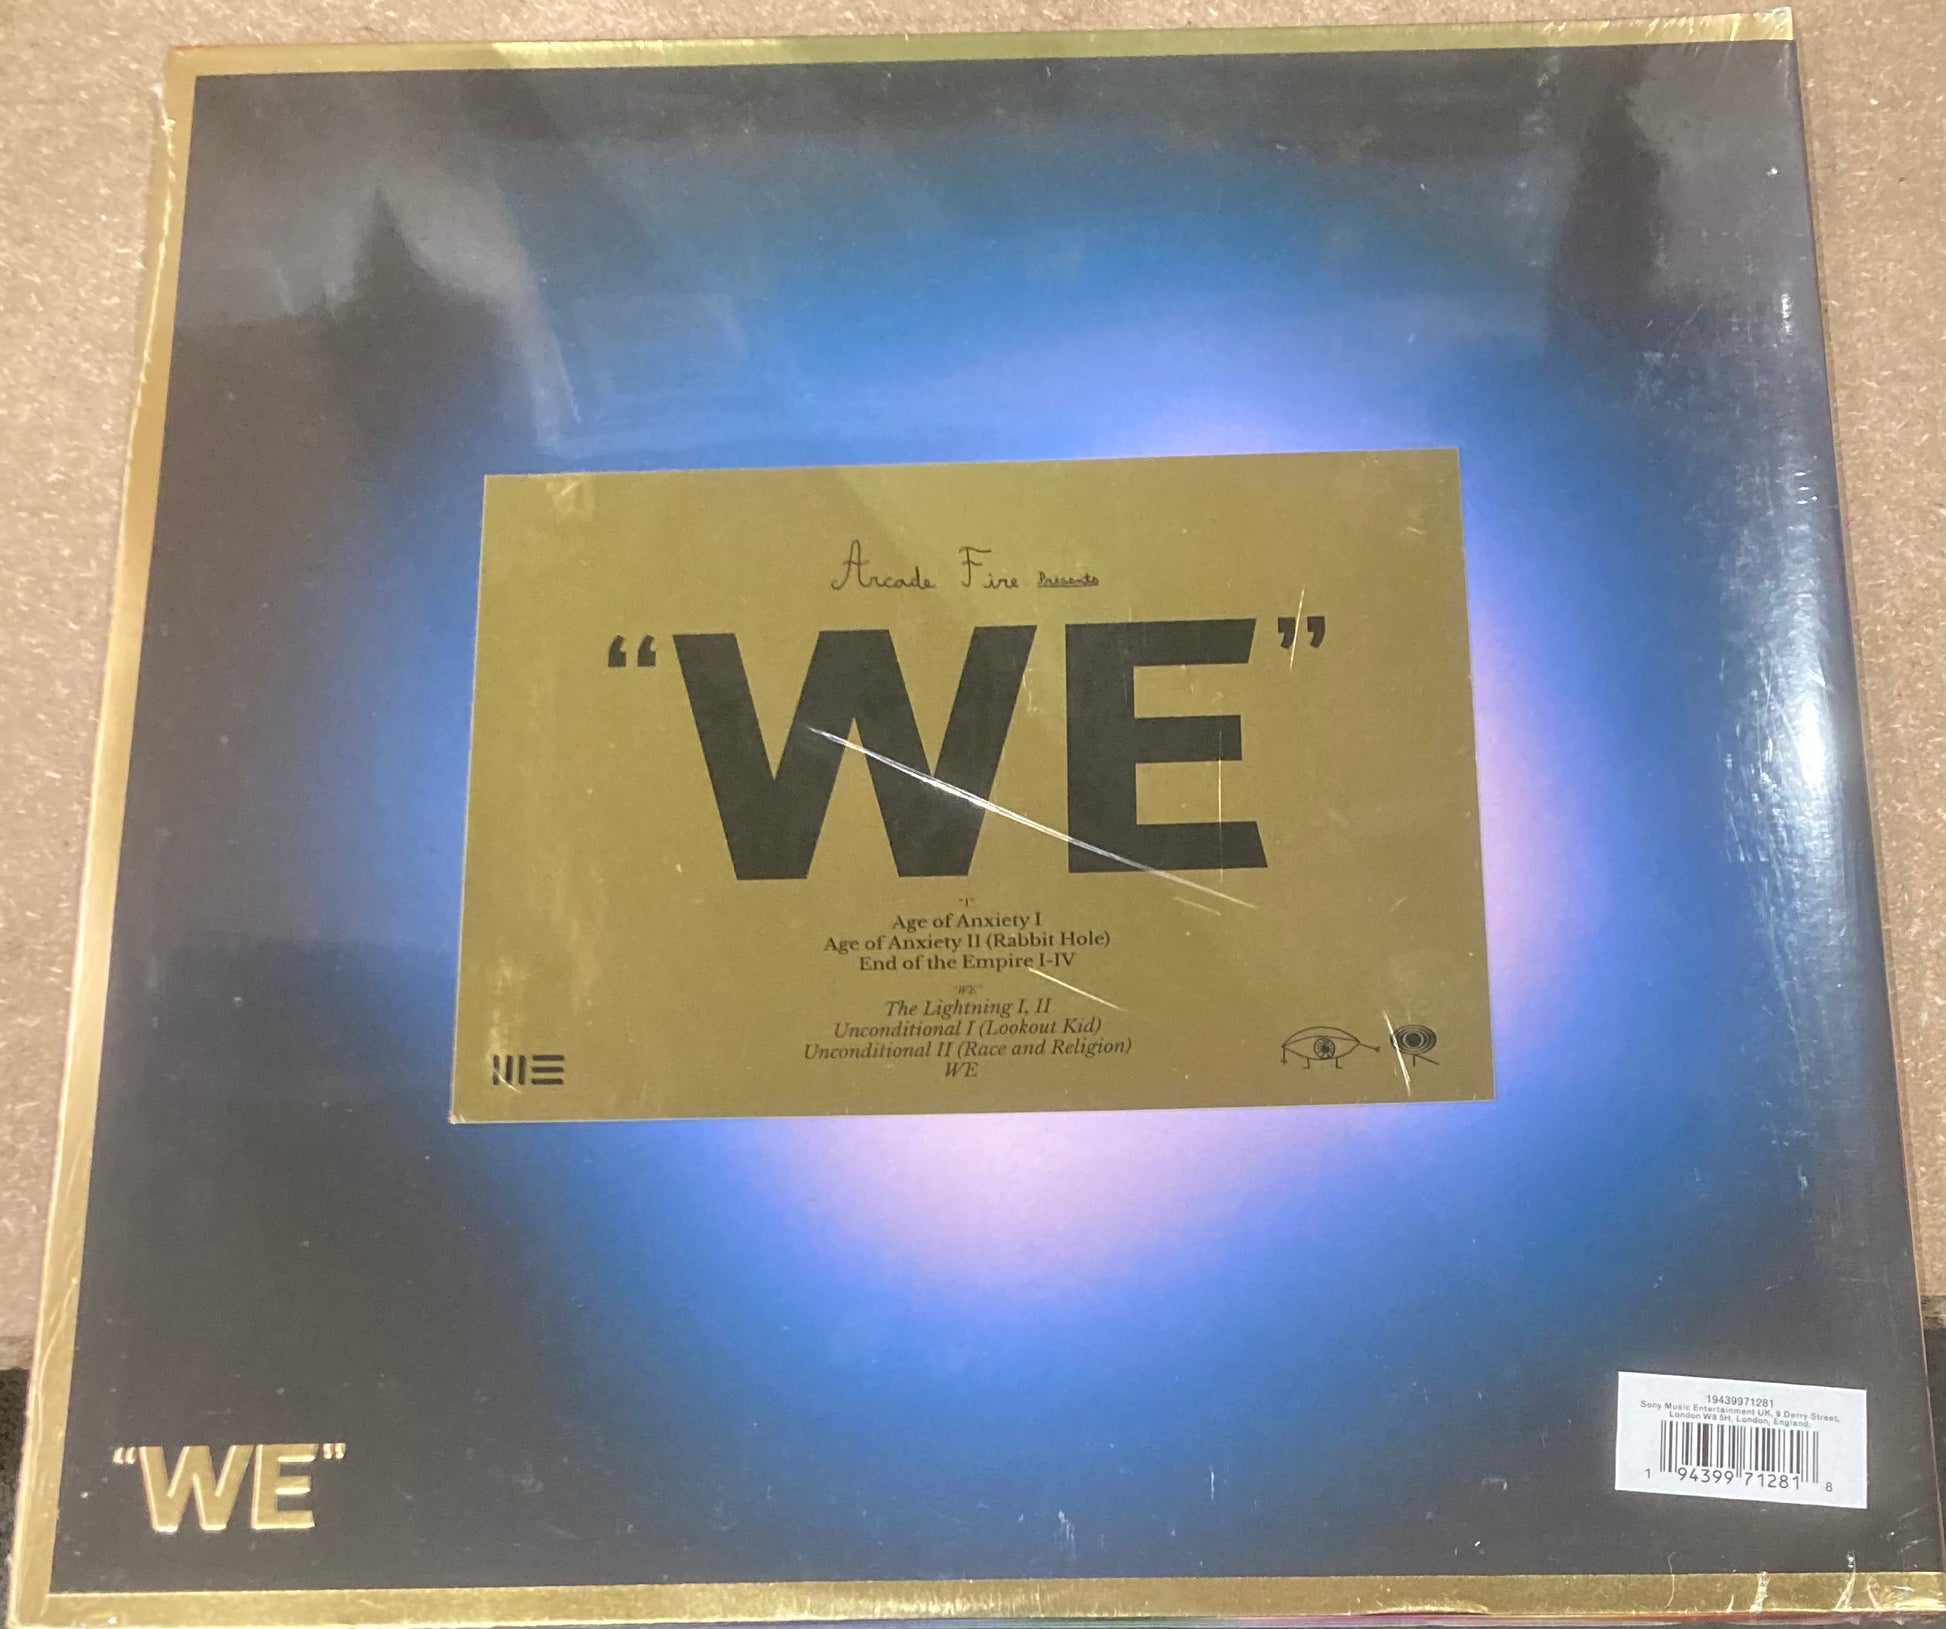 The back of 'Arcade Fire - We' on vinyl